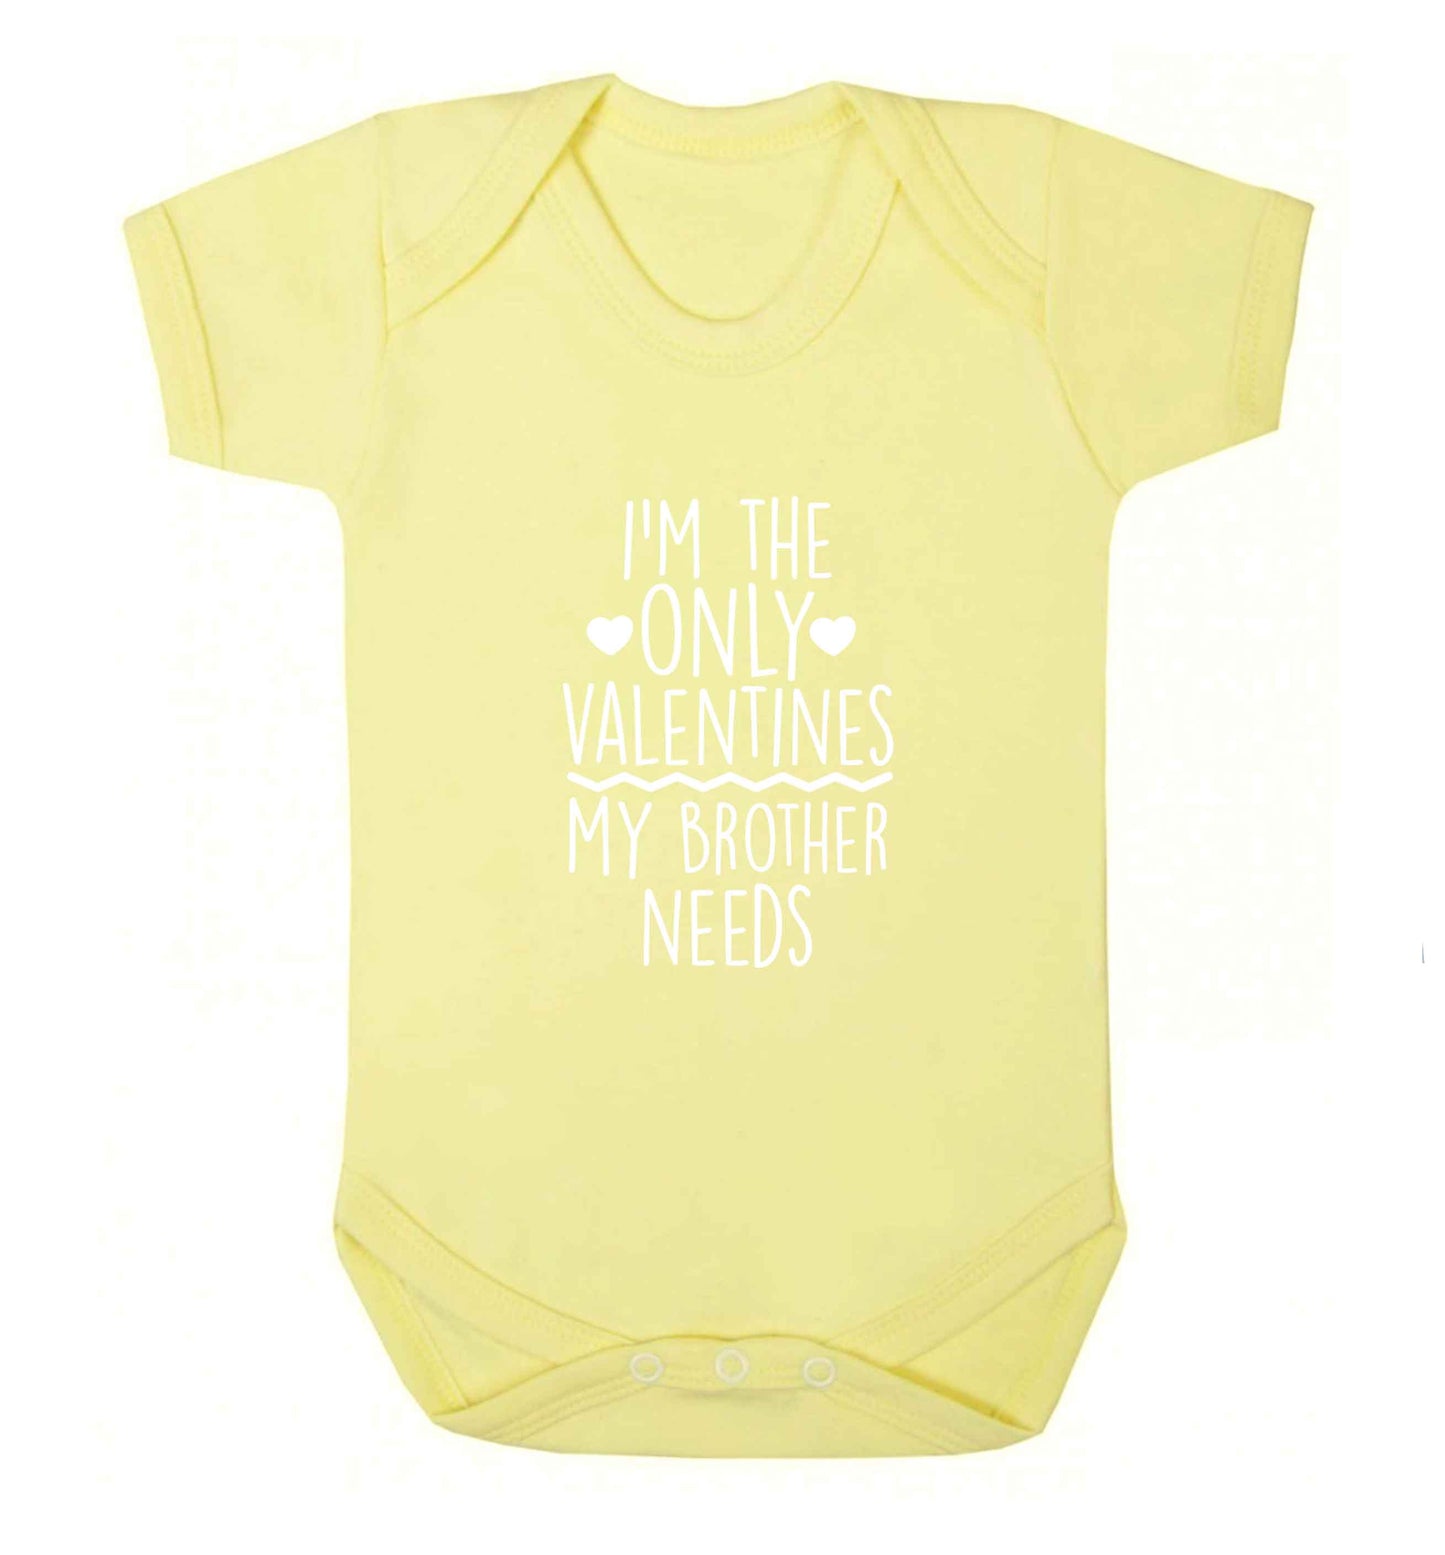 I'm the only valentines my brother needs baby vest pale yellow 18-24 months